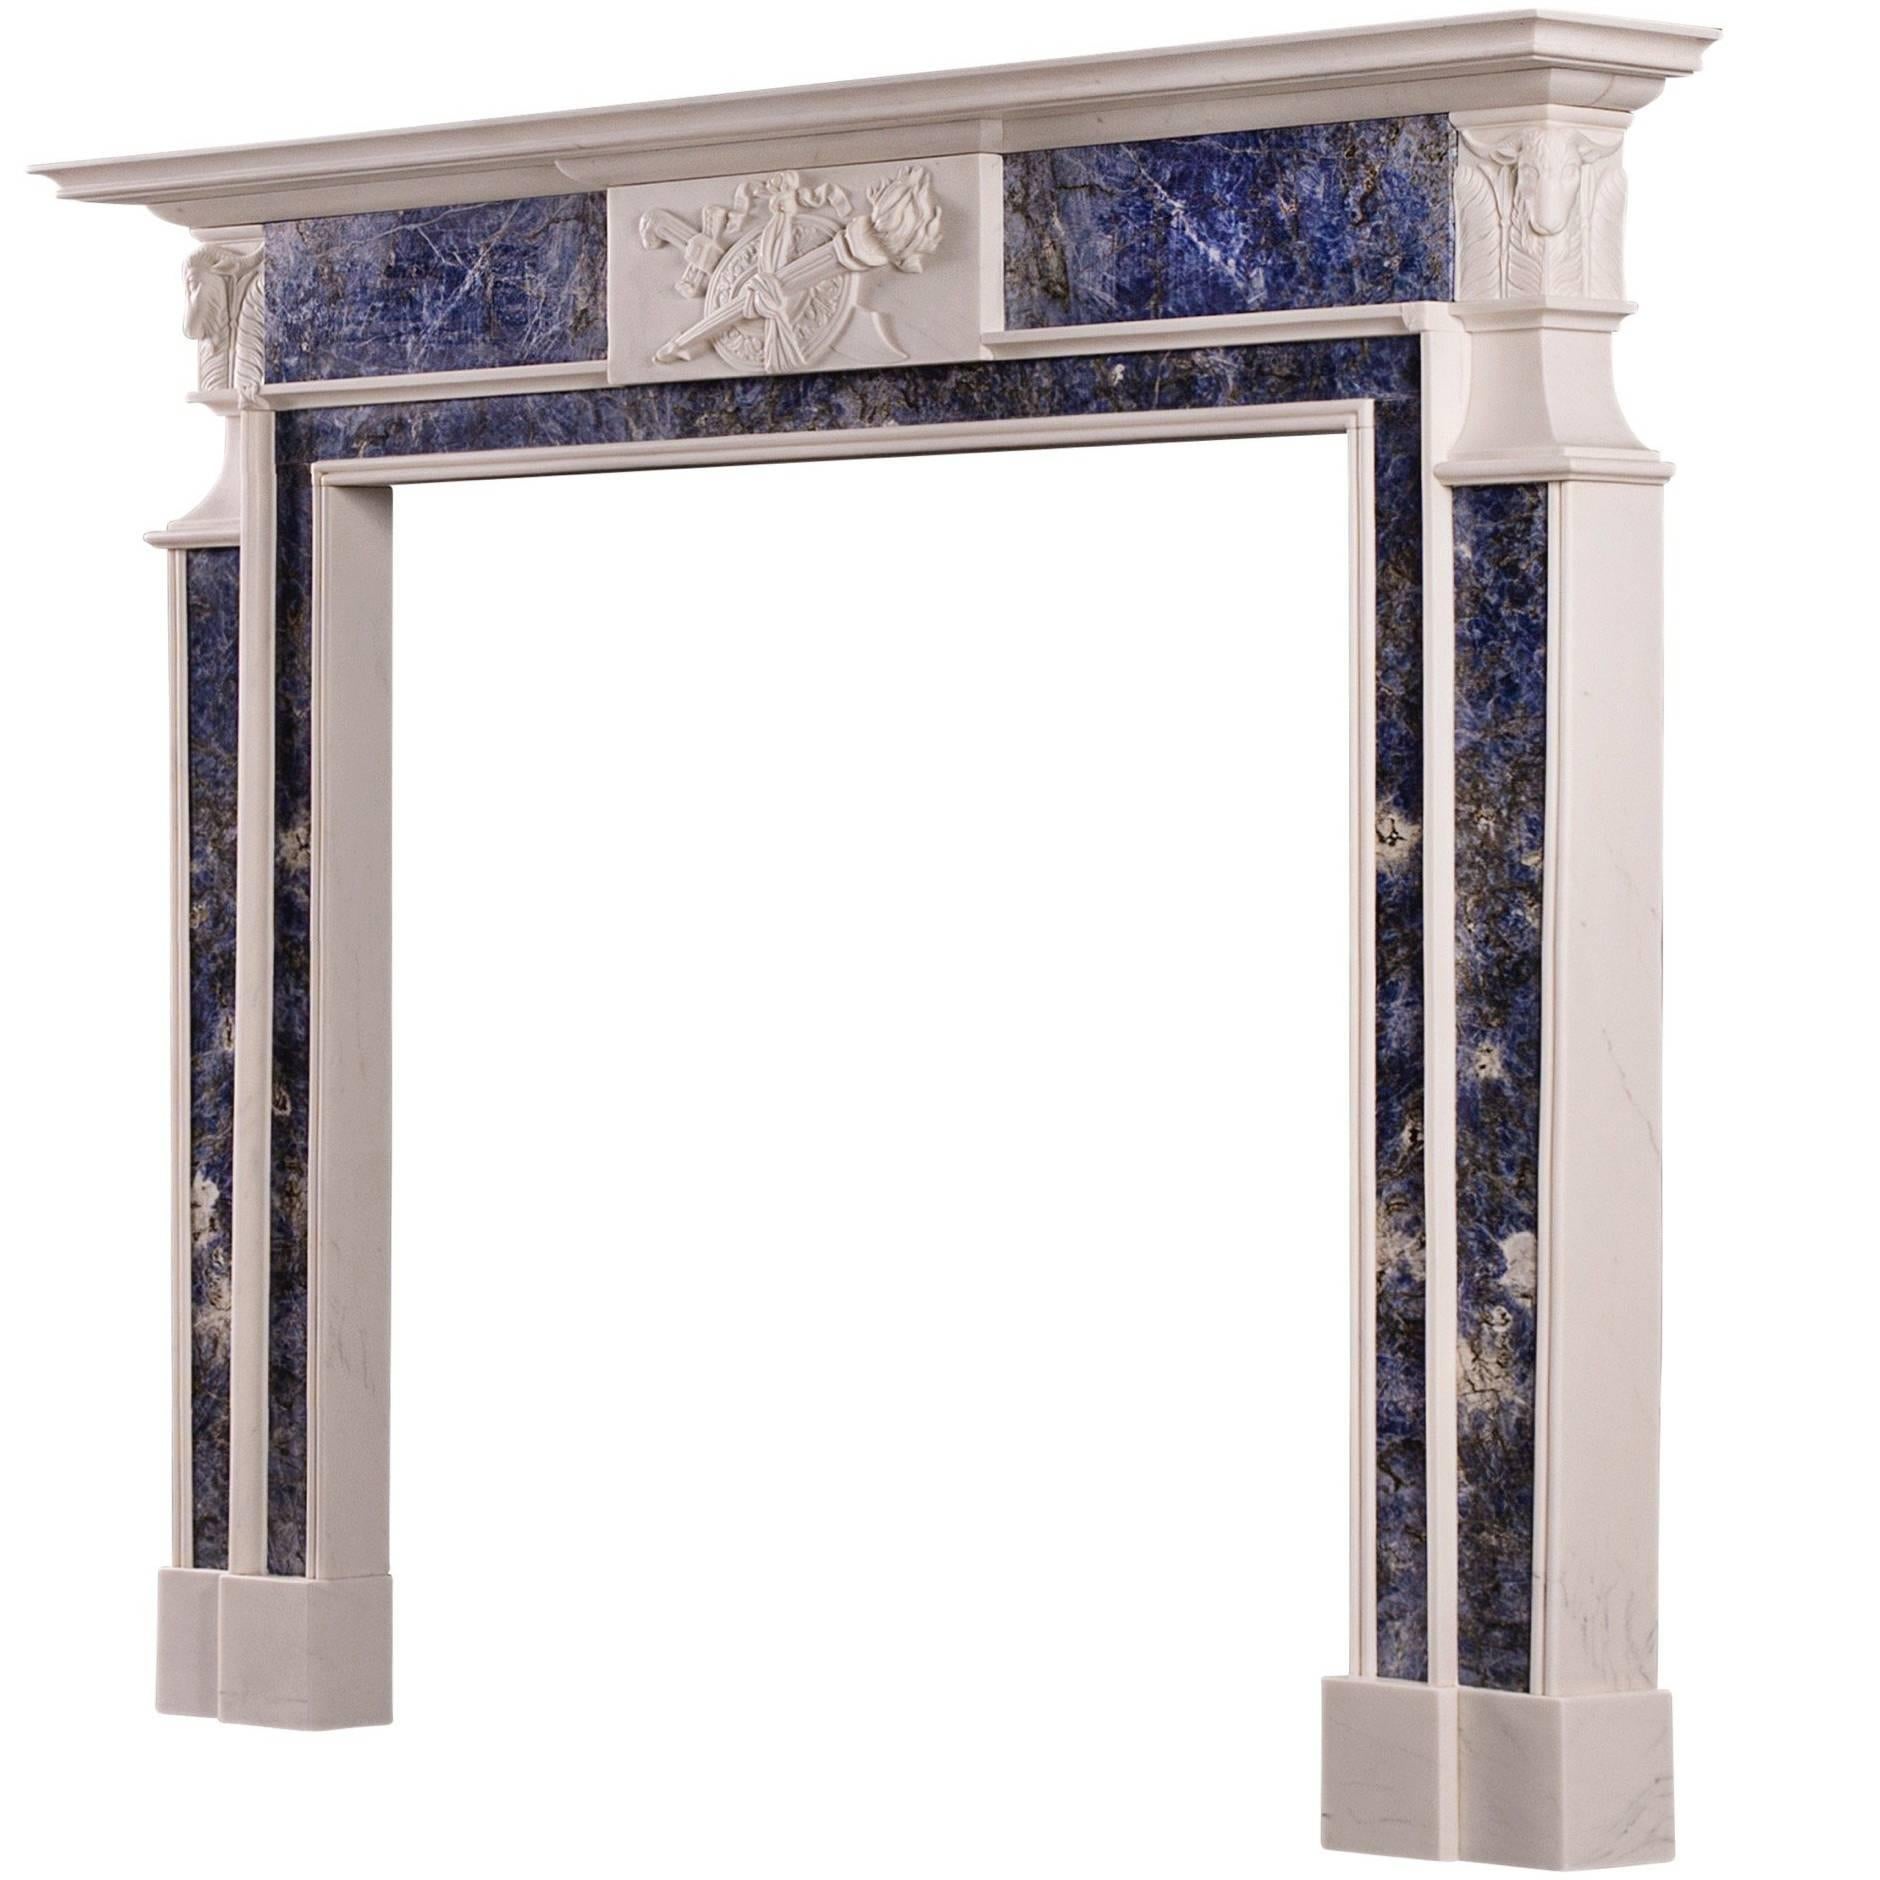 Late Georgian White Marble Fireplace with Blue Inlay For Sale